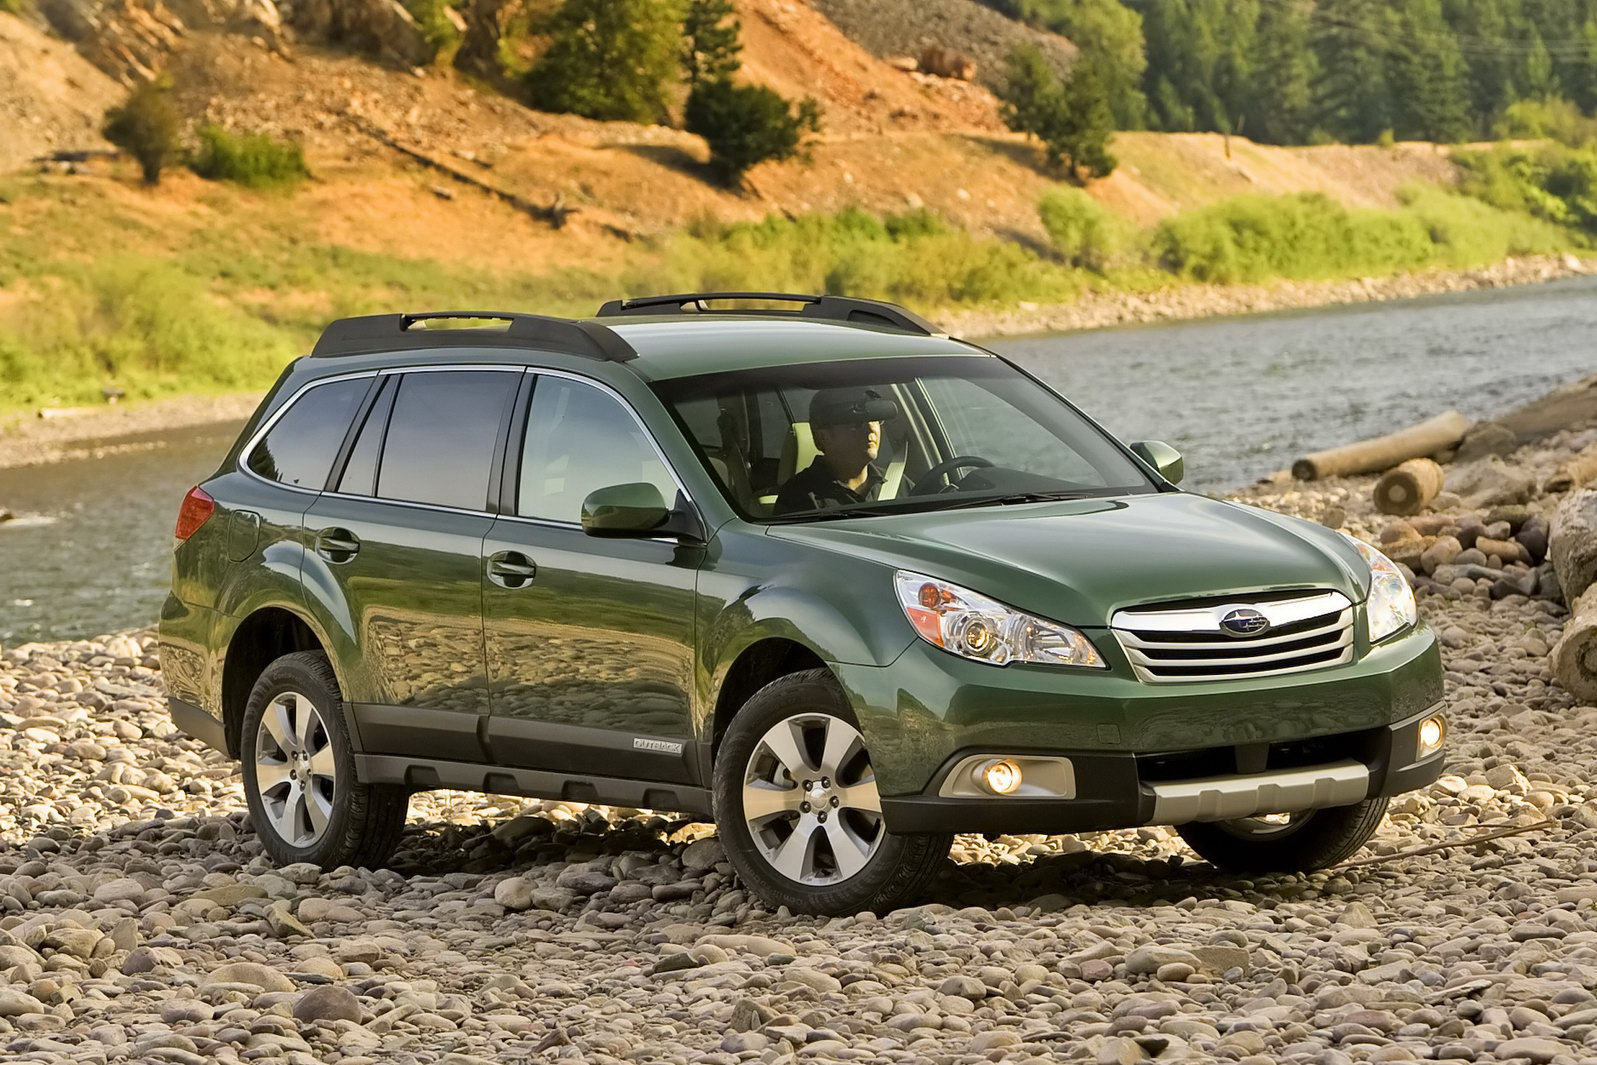 THE CAR: Minor Updates for 2011 Subaru Legacy Sedan and Outback